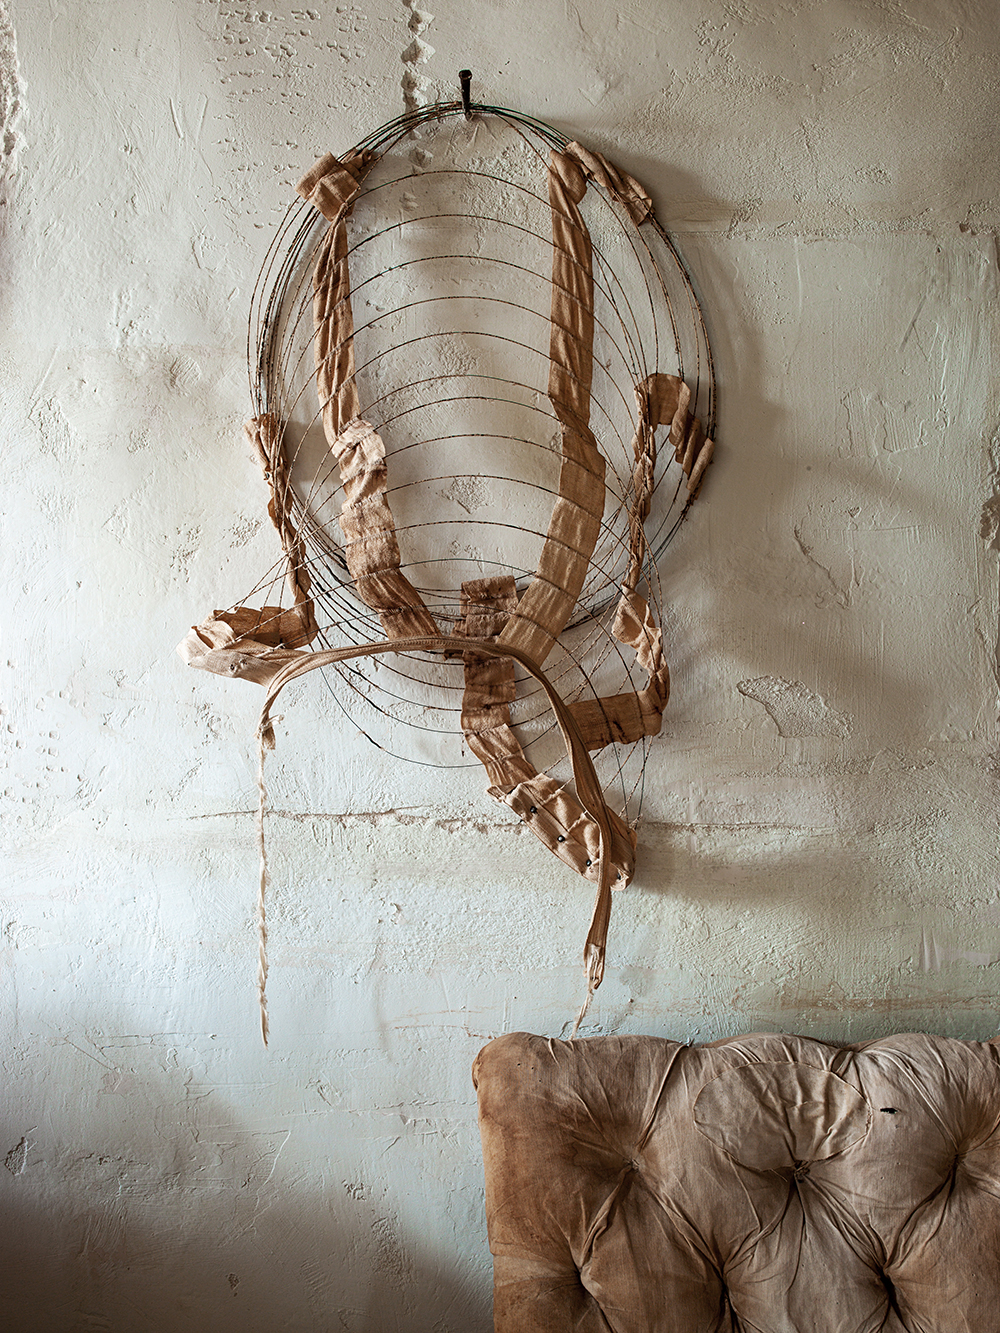 The metal remant of a 19th-century hooped skirt hangs against a plastered wall, with a couch under it